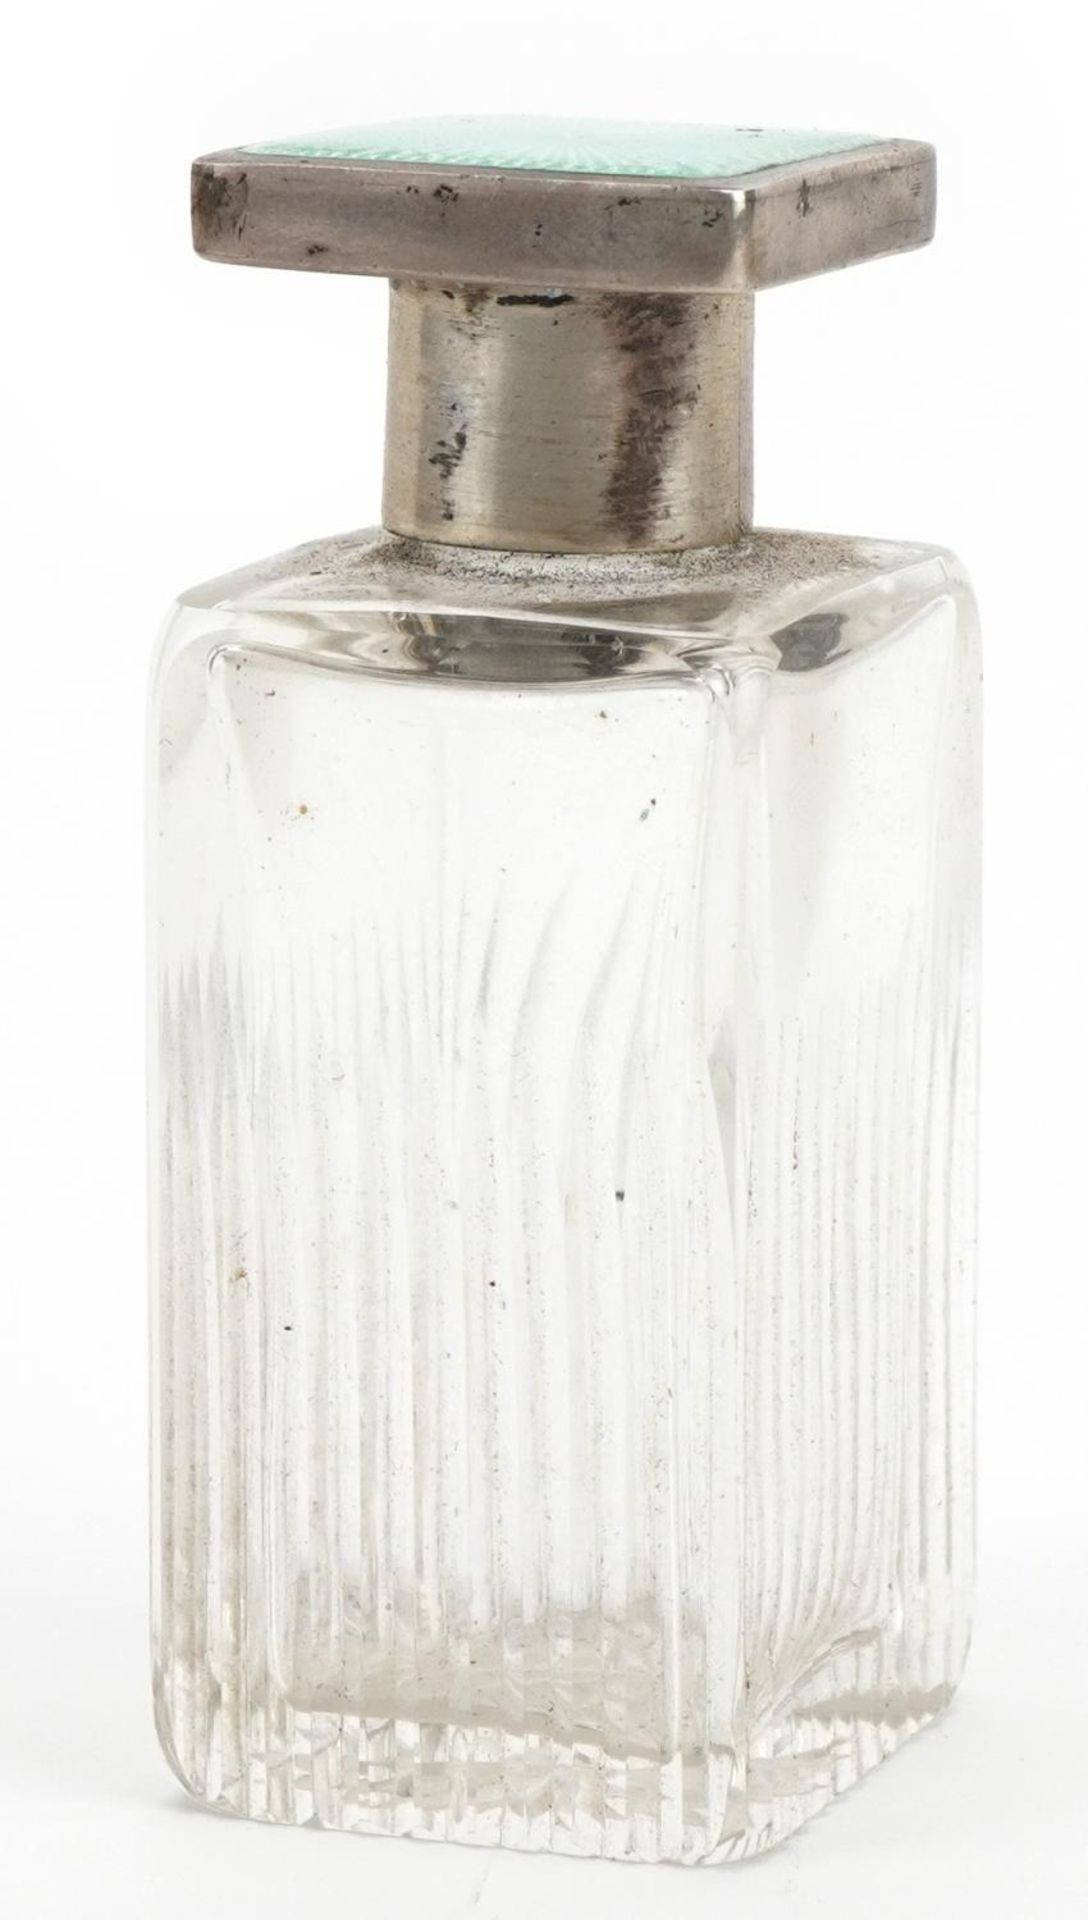 William Neale & Son Ltd, Art Deco cut glass scent bottle with silver and green guilloche enamelled